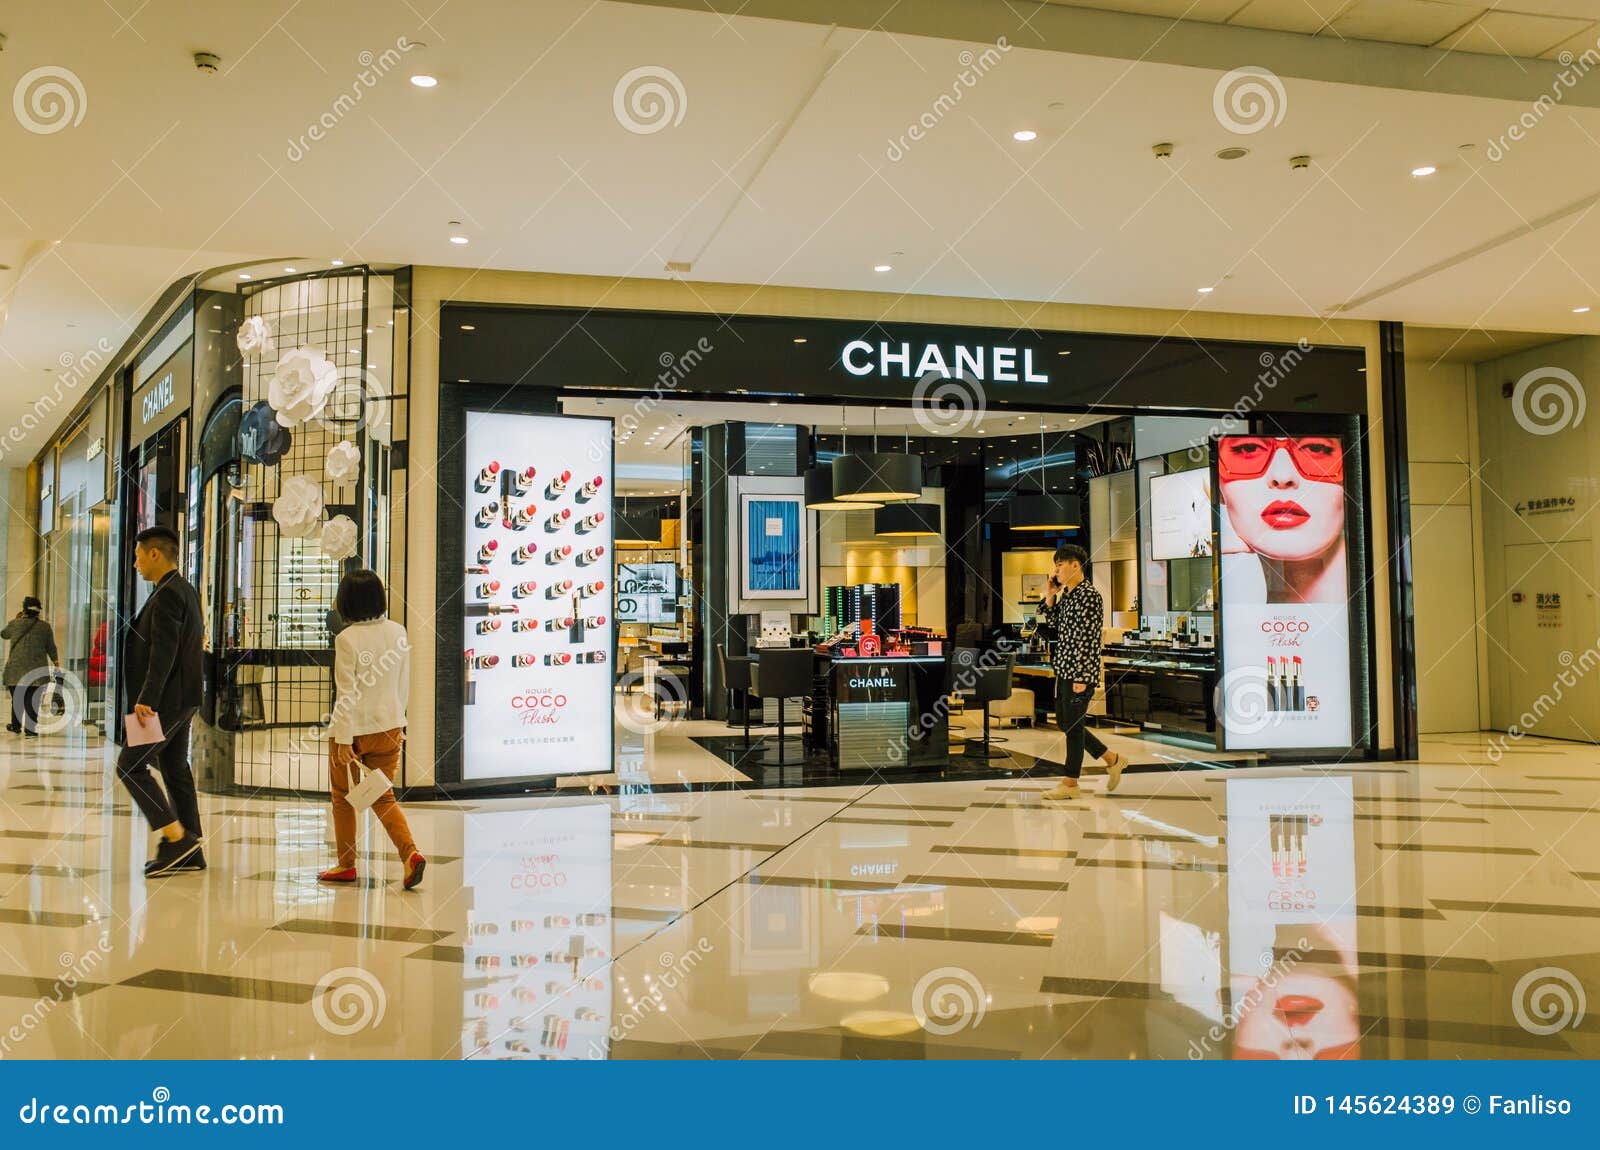 Chanel Make-up Retail Store in Chengdu Editorial Stock Image - Image of ...